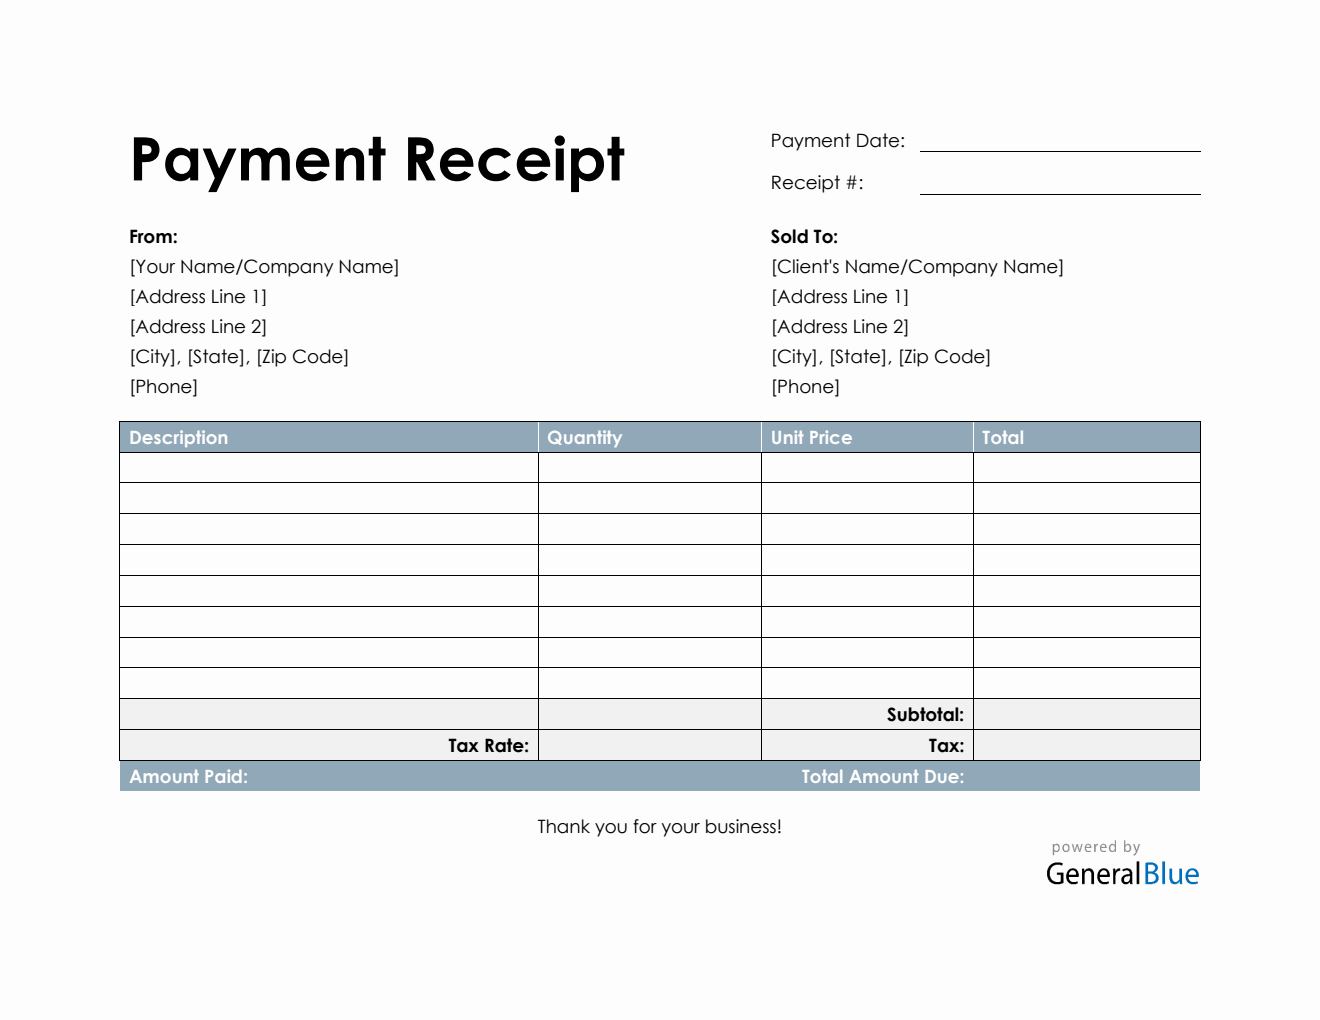 Payment Receipt Template in Word (Basic)